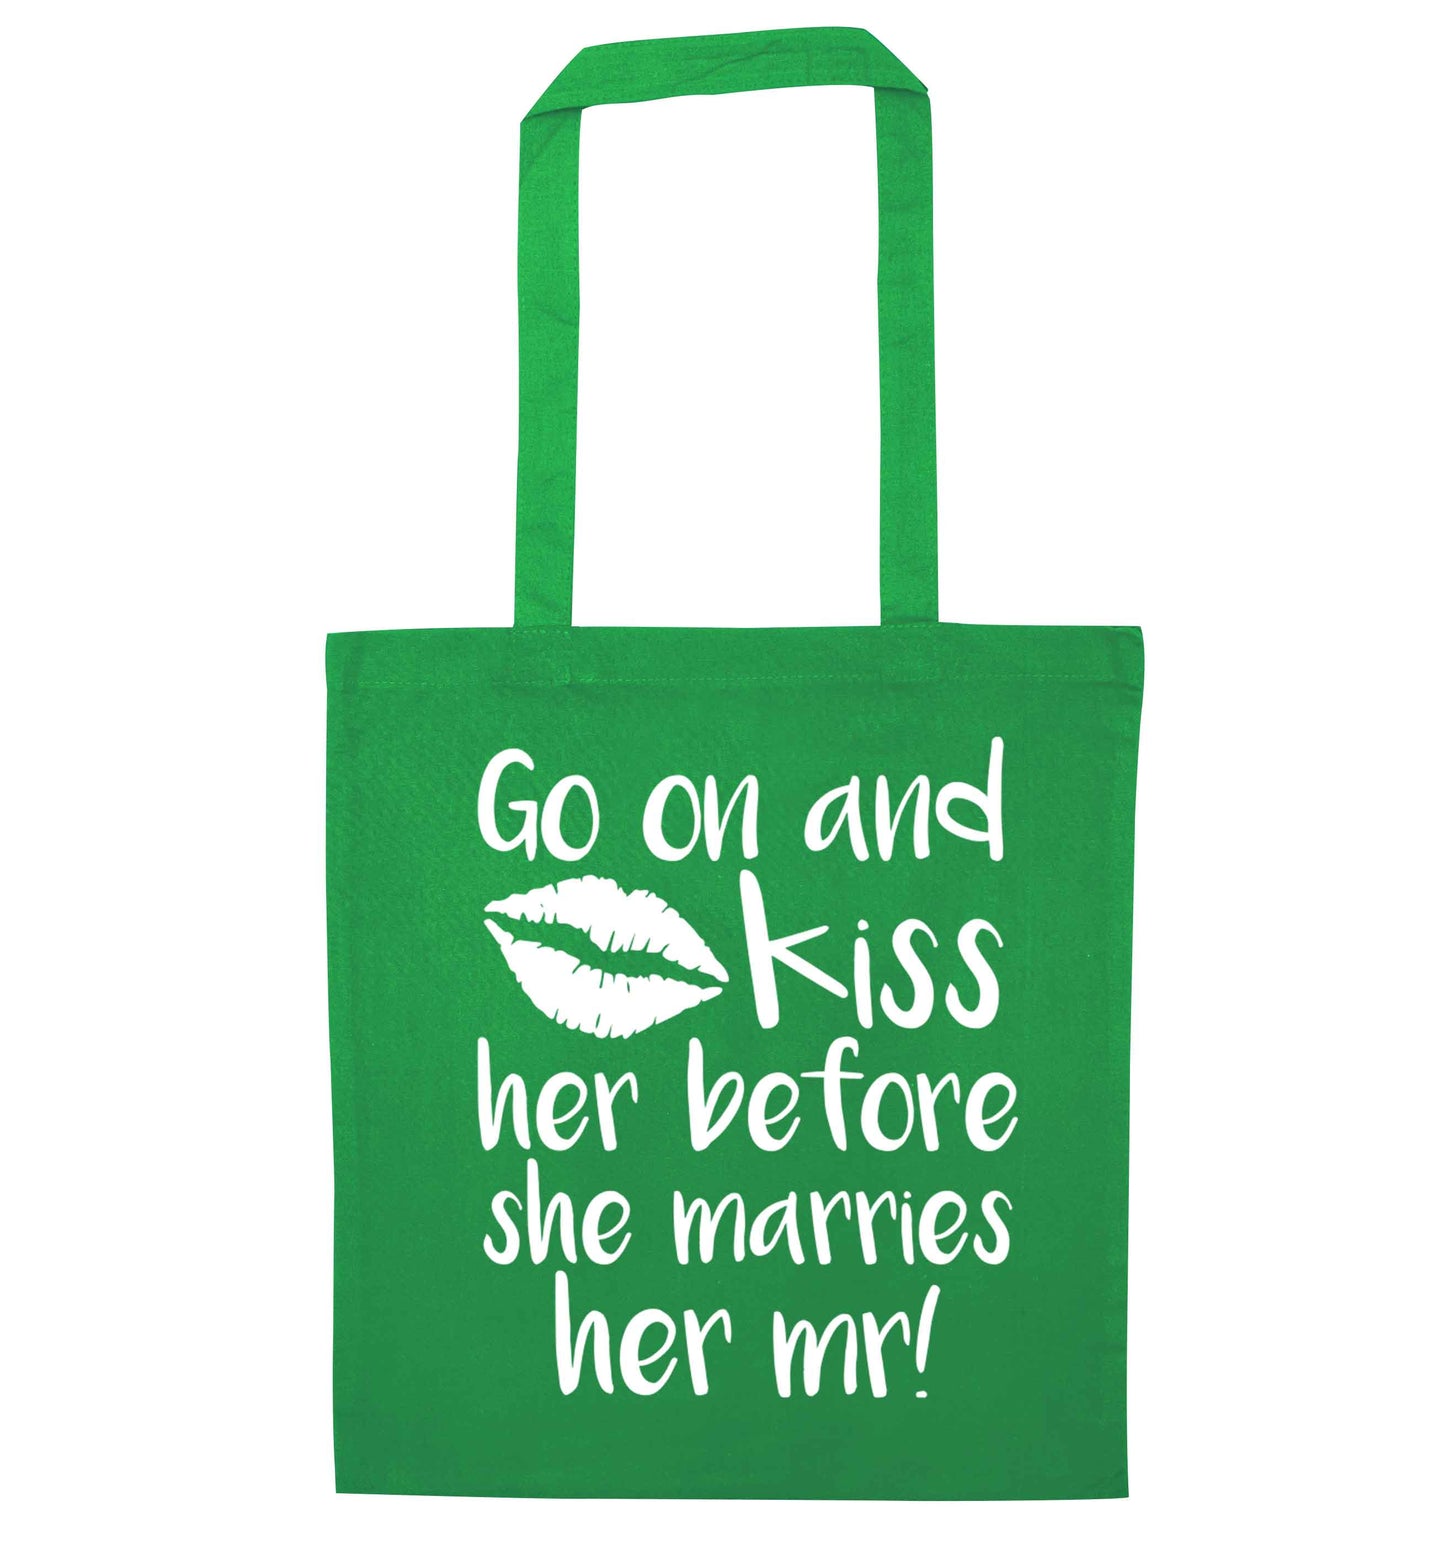 Kiss her before she marries her mr! green tote bag